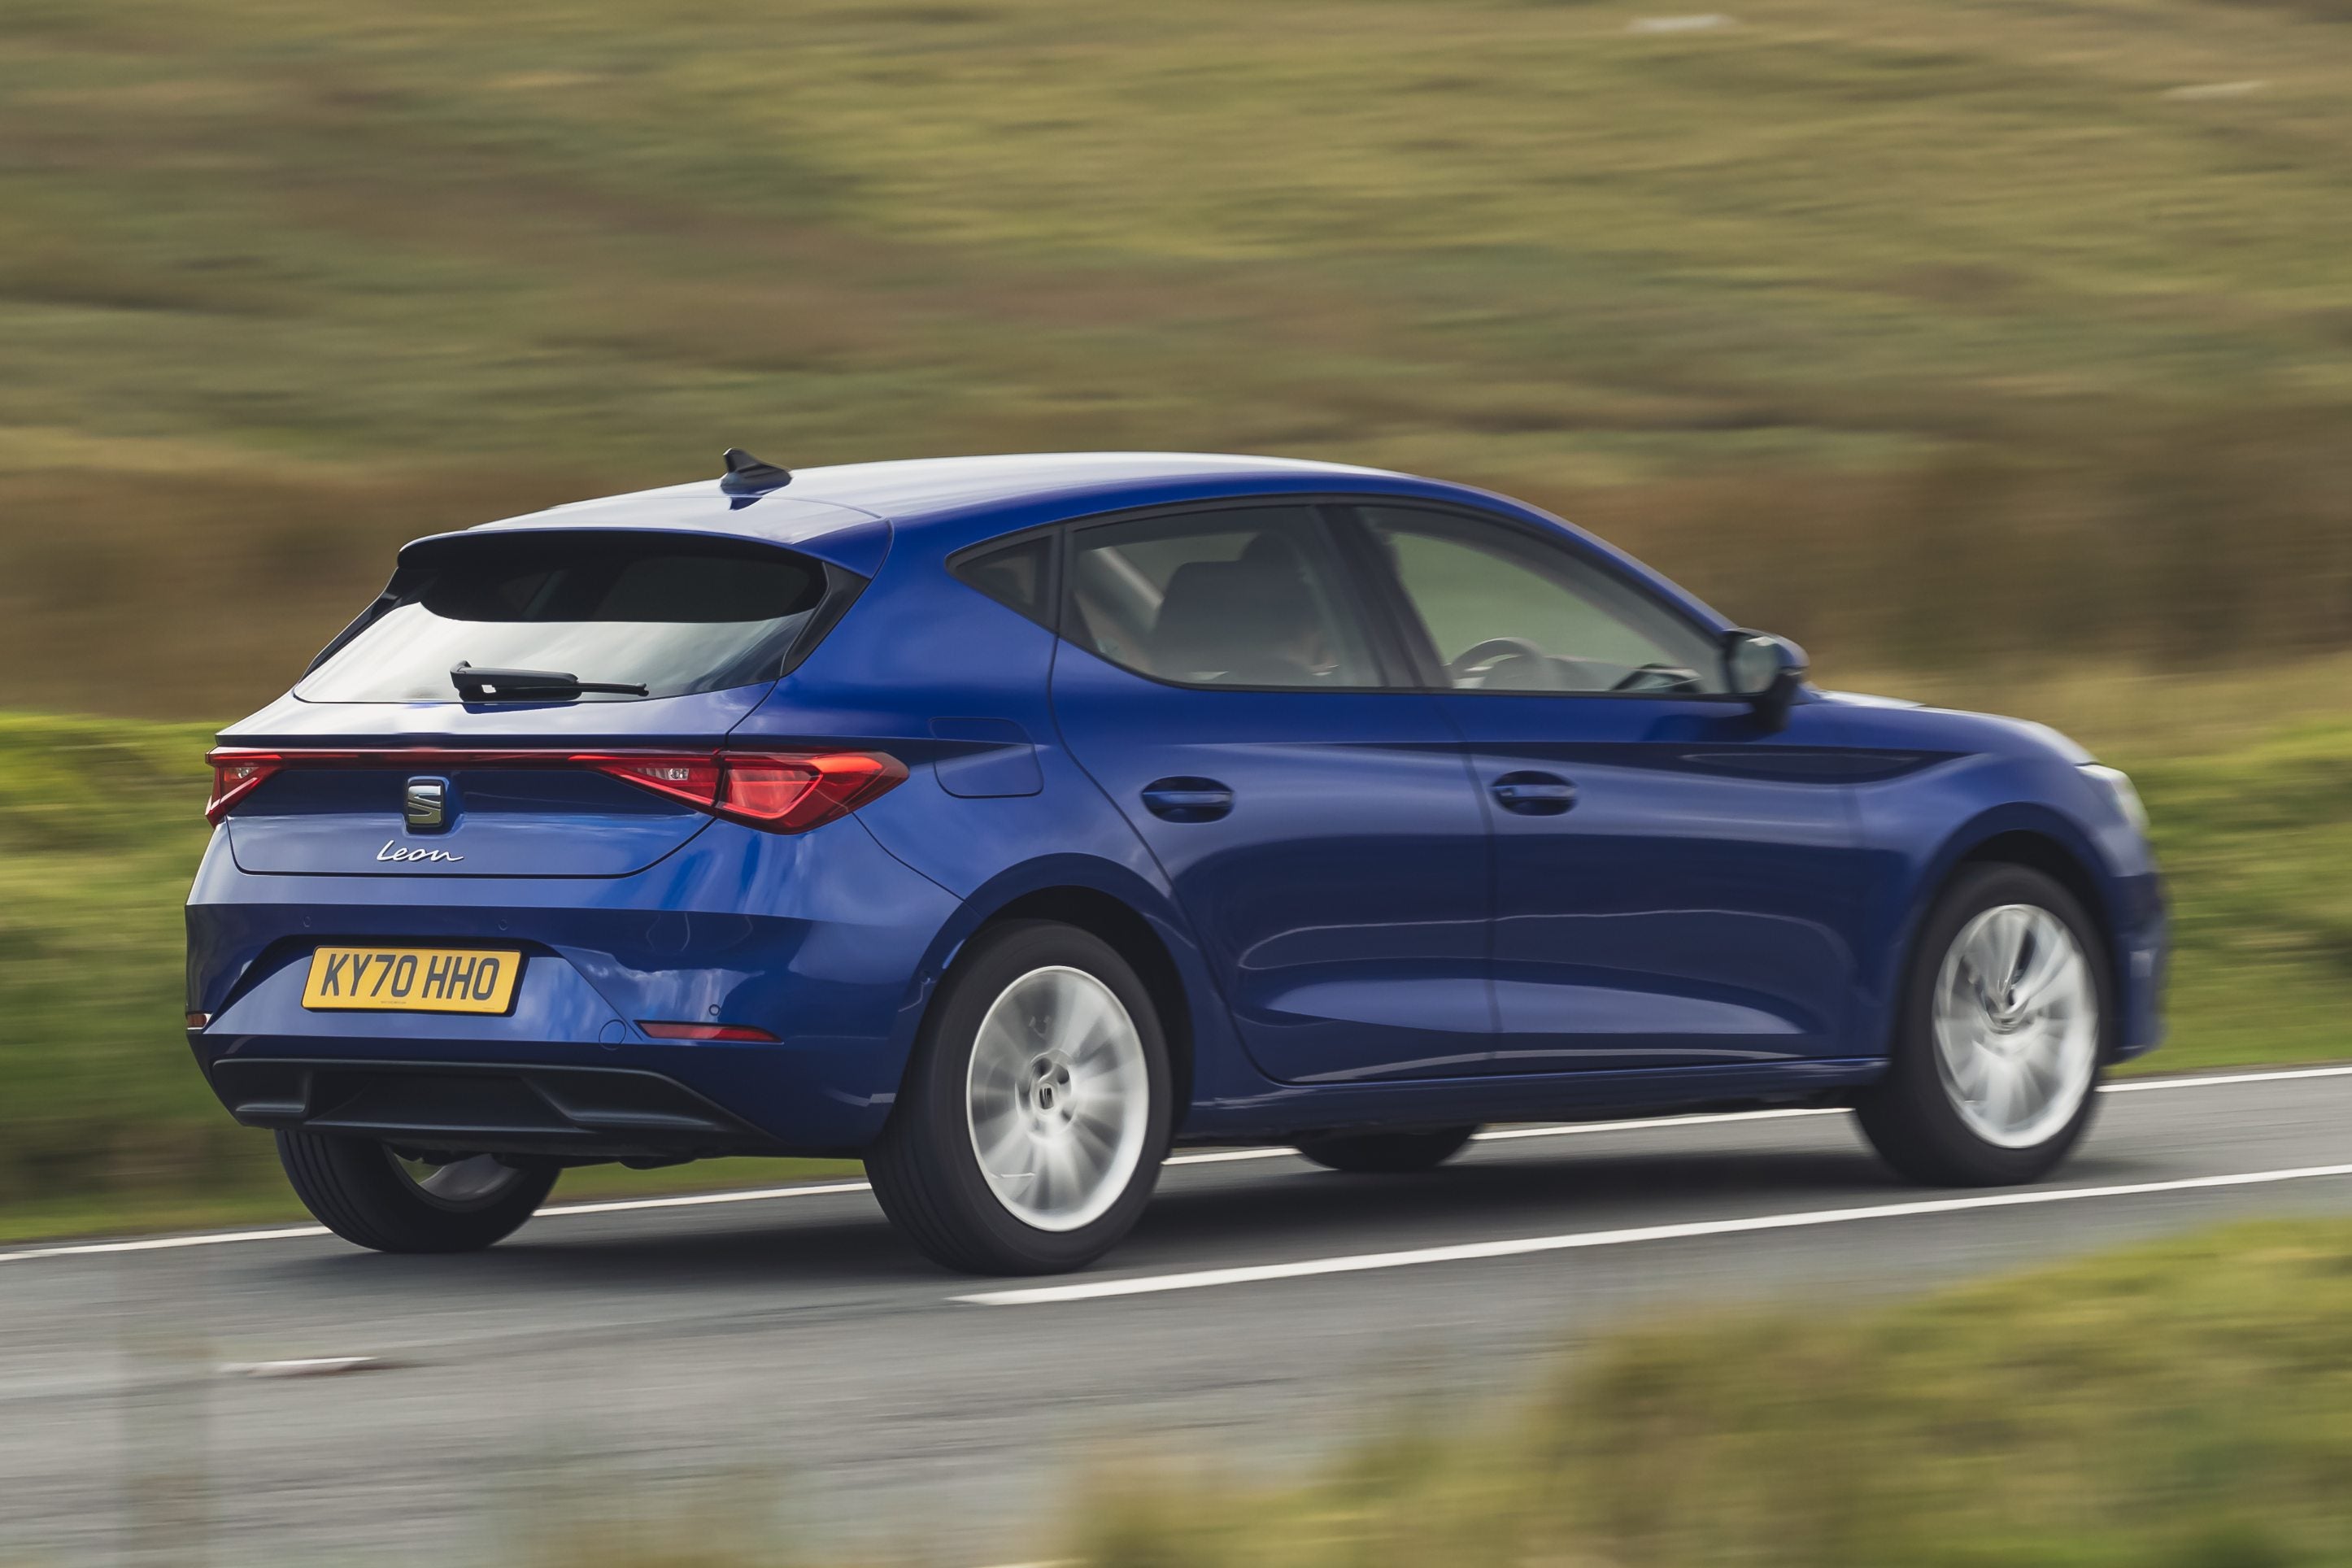 SEAT Leon review 2022: exterior dynamic blue rear